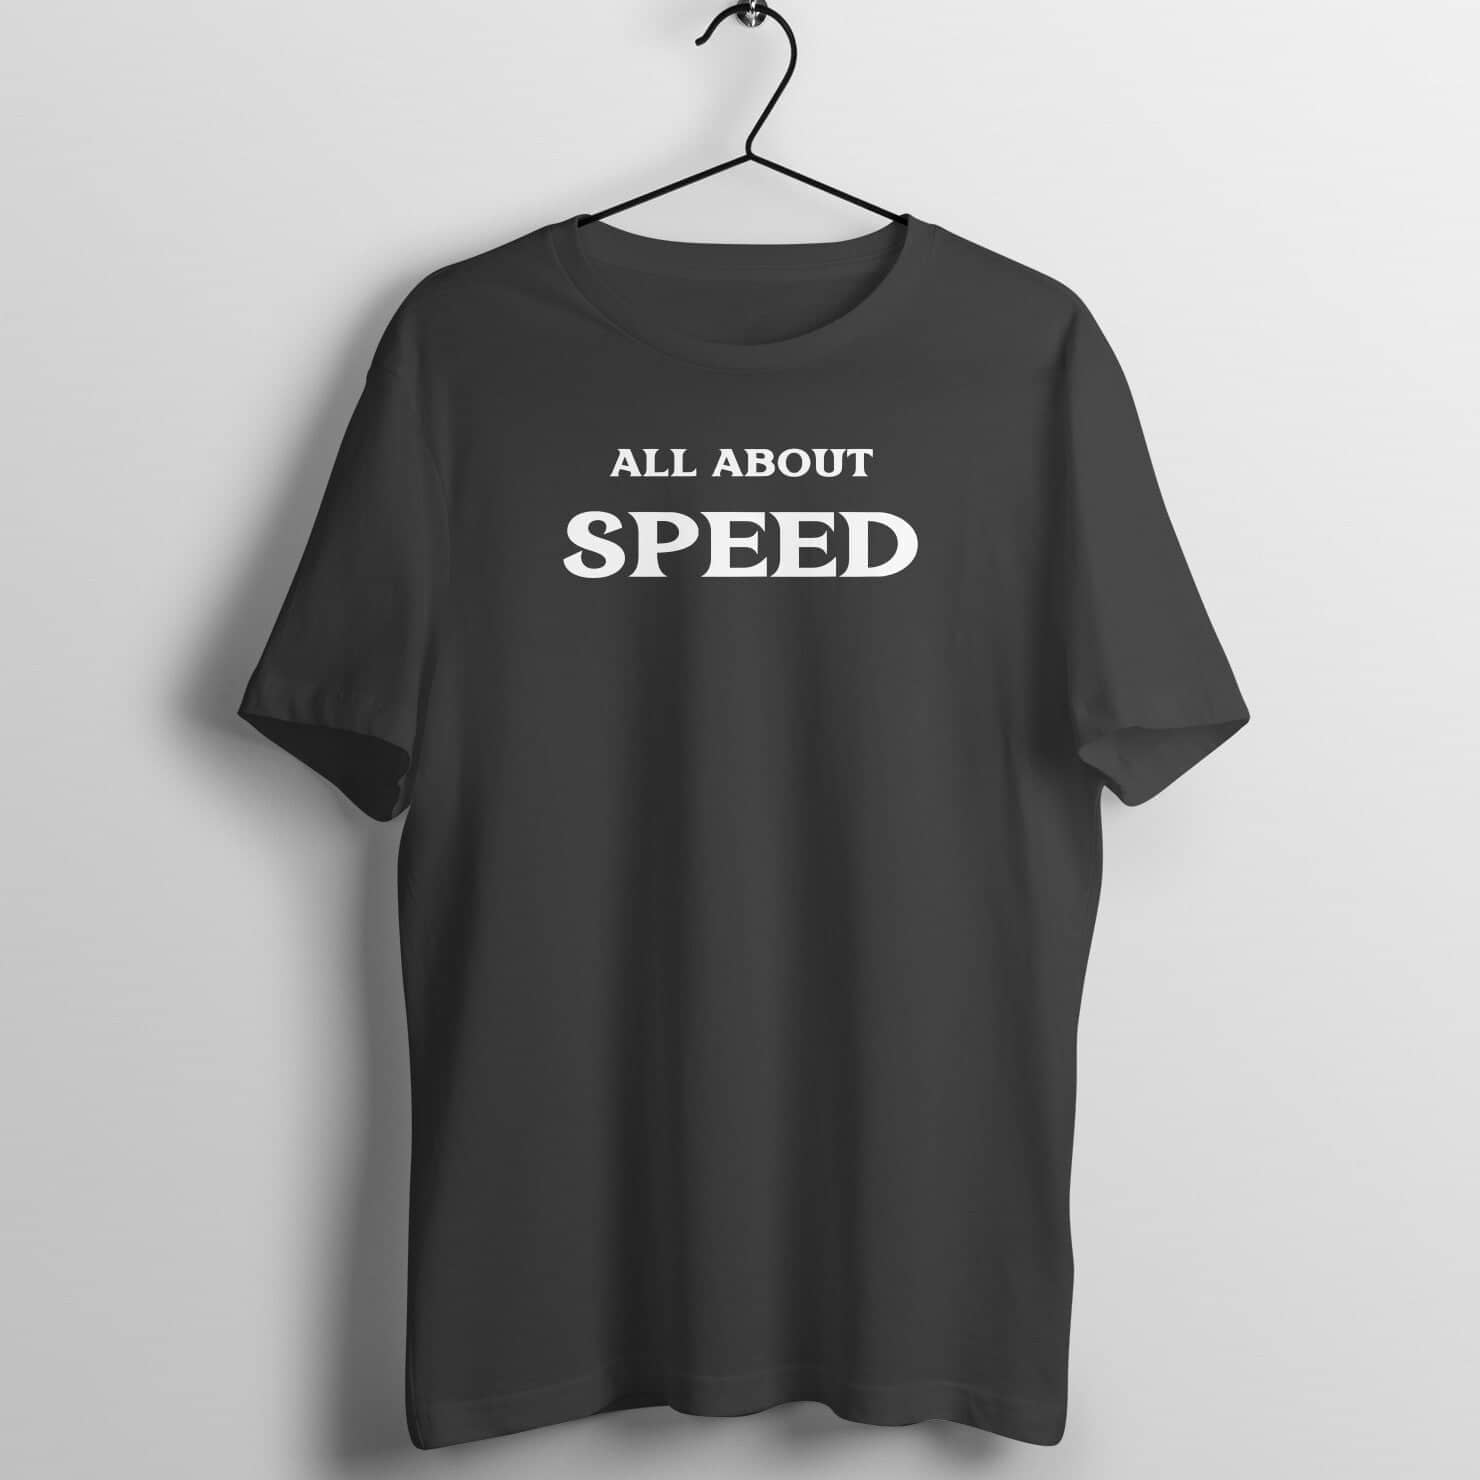 All About Speed Exclusive Black T Shirt for Men and Women Shirts & Tops Printrove Black S 